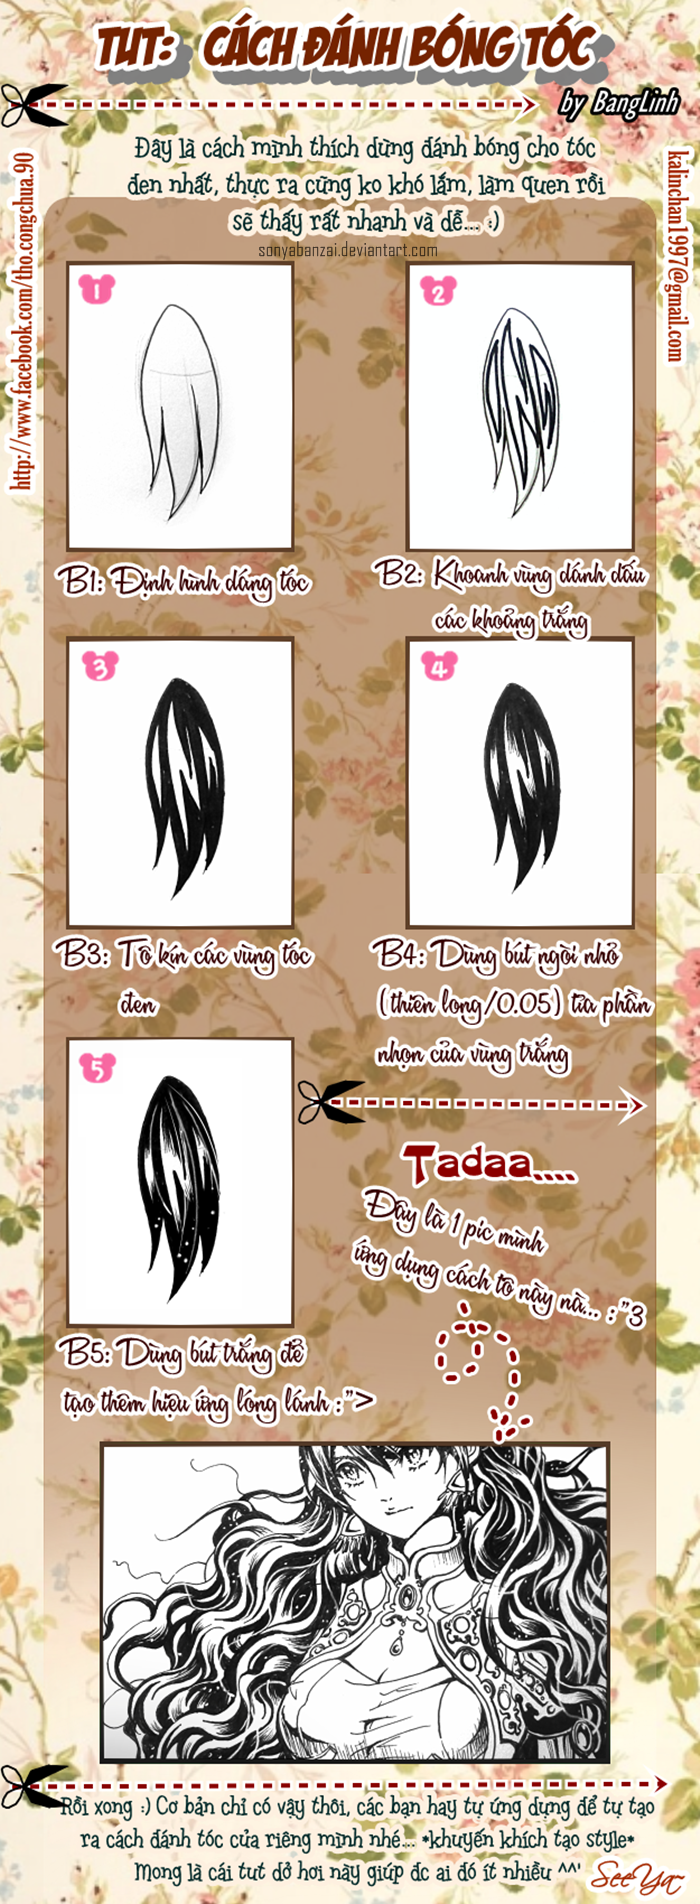 Tutorial How To Ink The Black Hair By Banglinh1997 On Deviantart